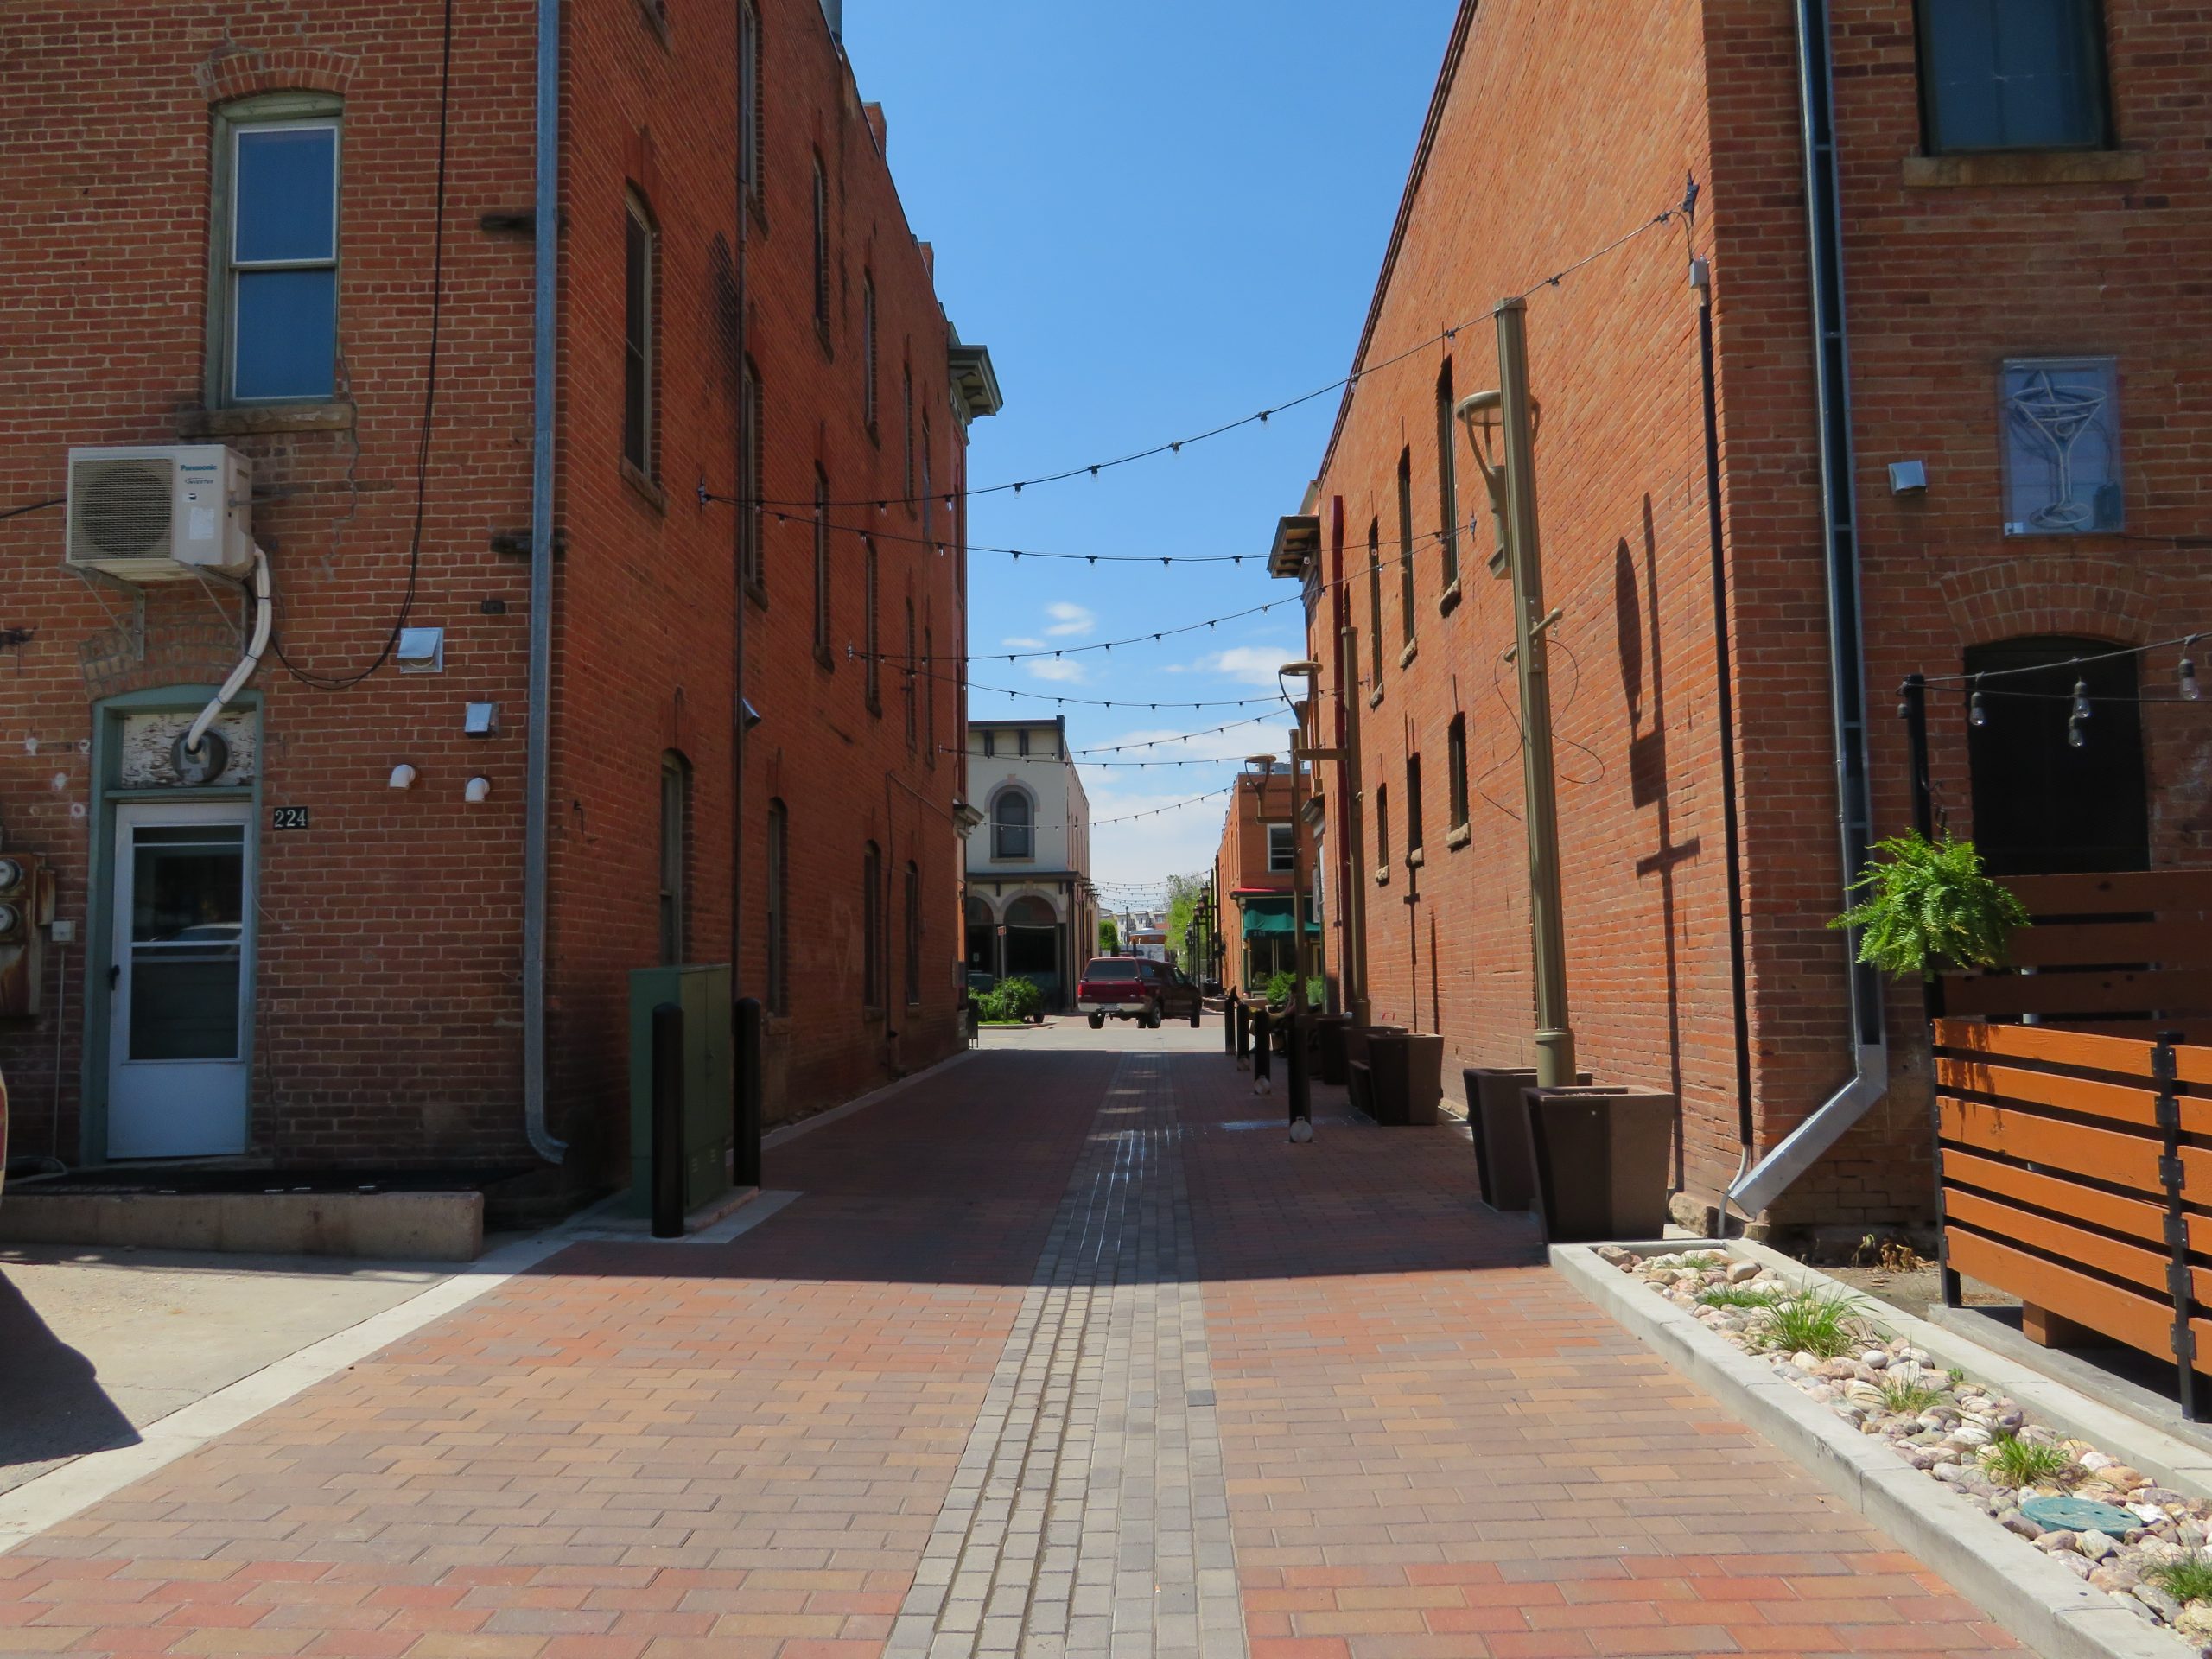 WEST MOUNTAIN ALLEY AND OLD FIREHOUSE ALLEY RENOVATIONS